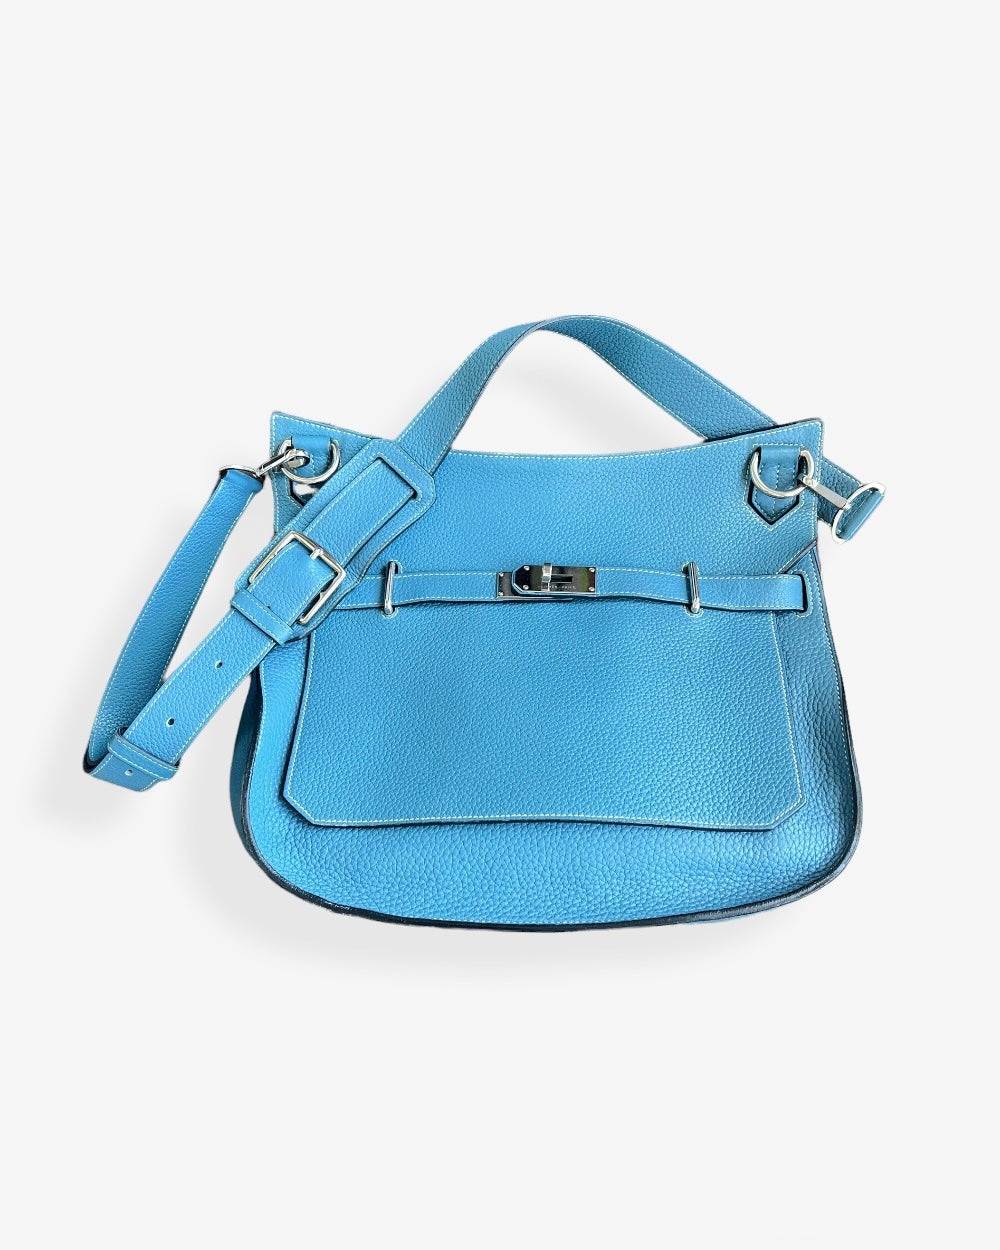 Hermès Hermes Blue Jean Togo Leather With White Contrast Stitching